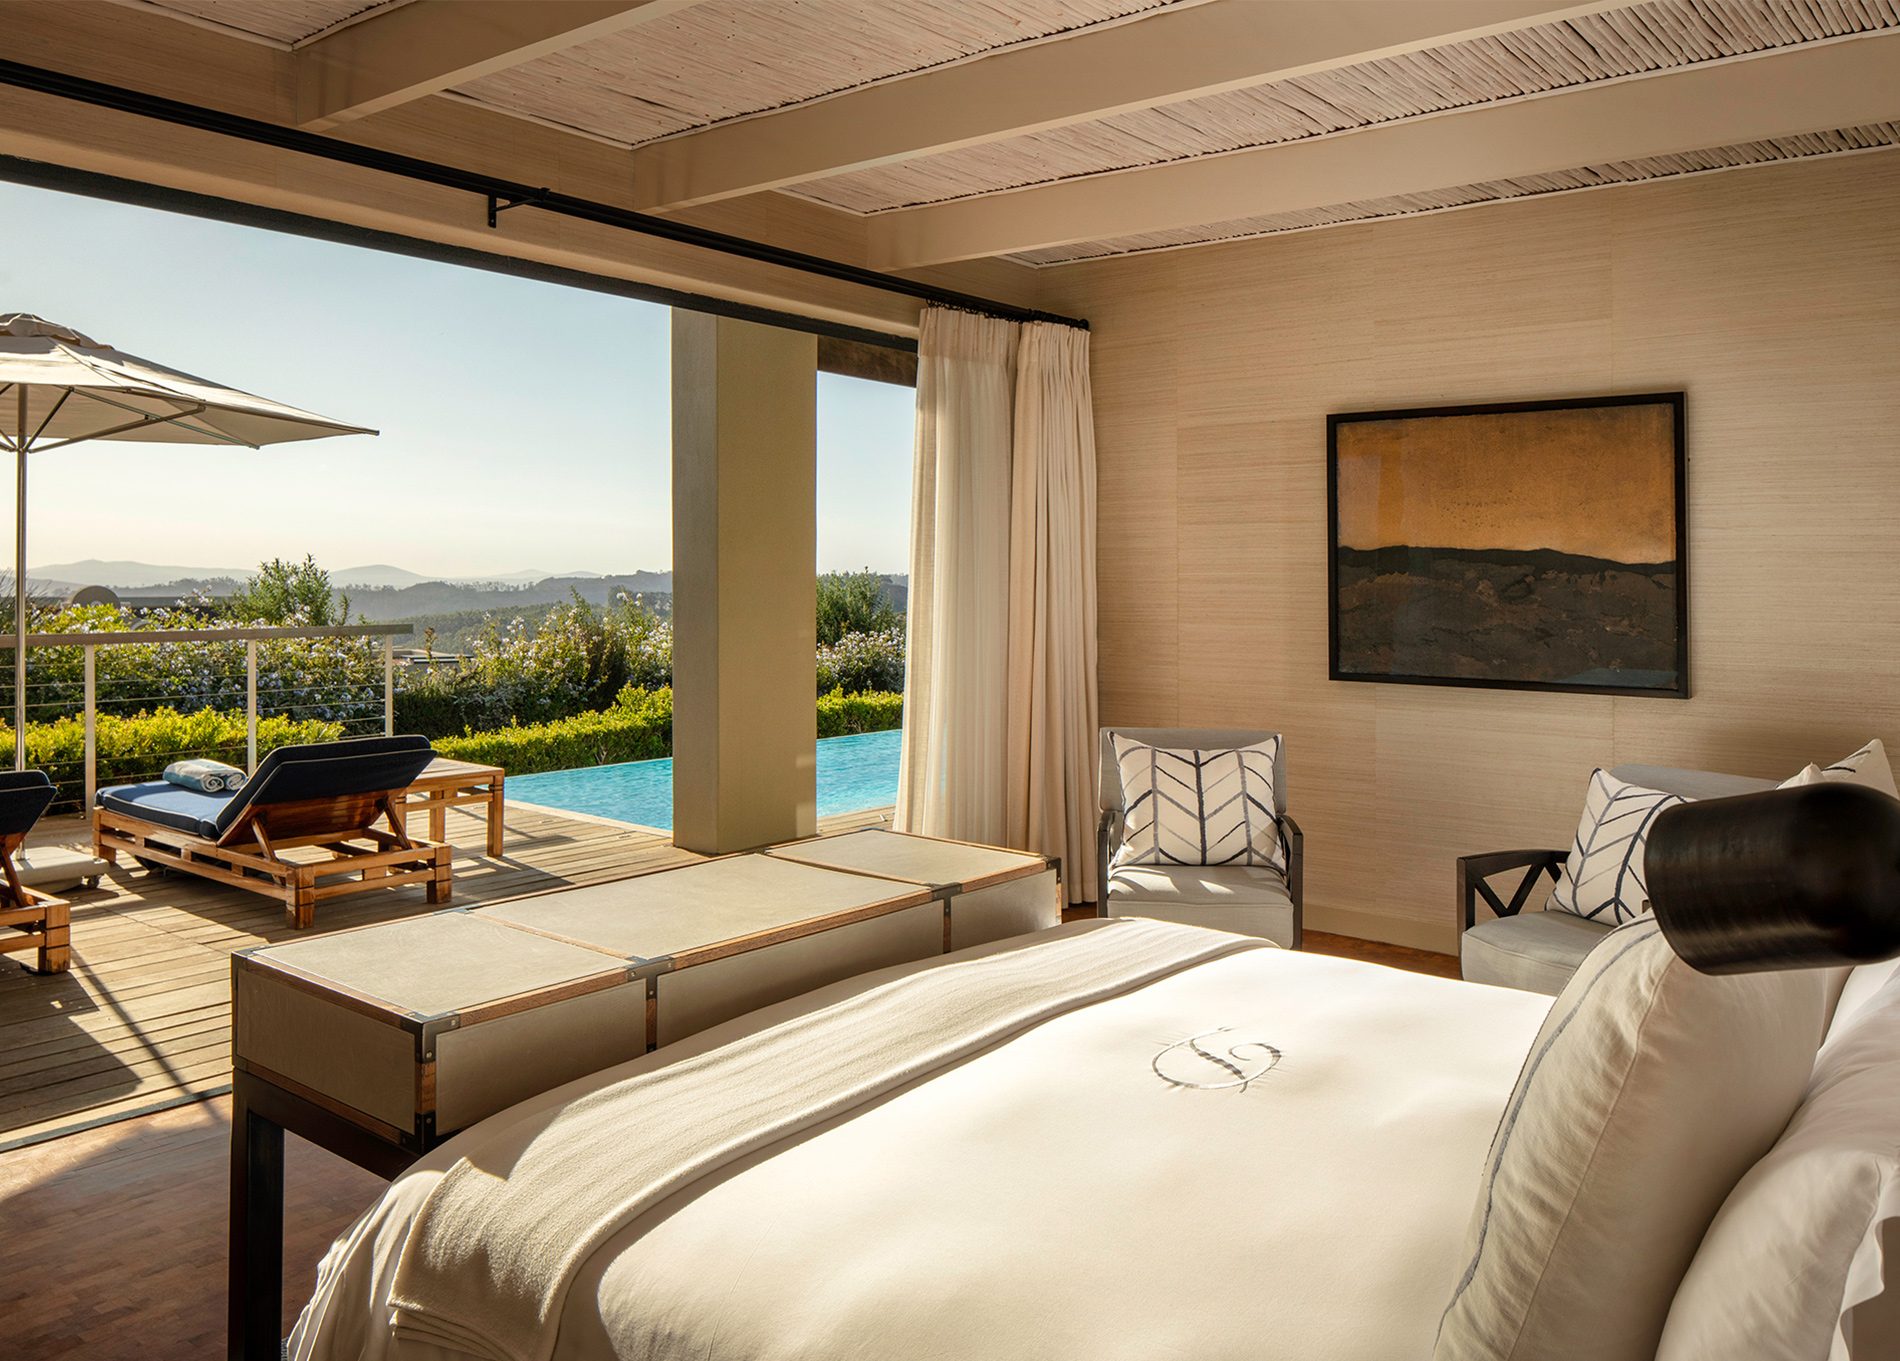 The bedroom of Delaire Graff Estate Presidential Lodge 1 leading onto private terrace with pool